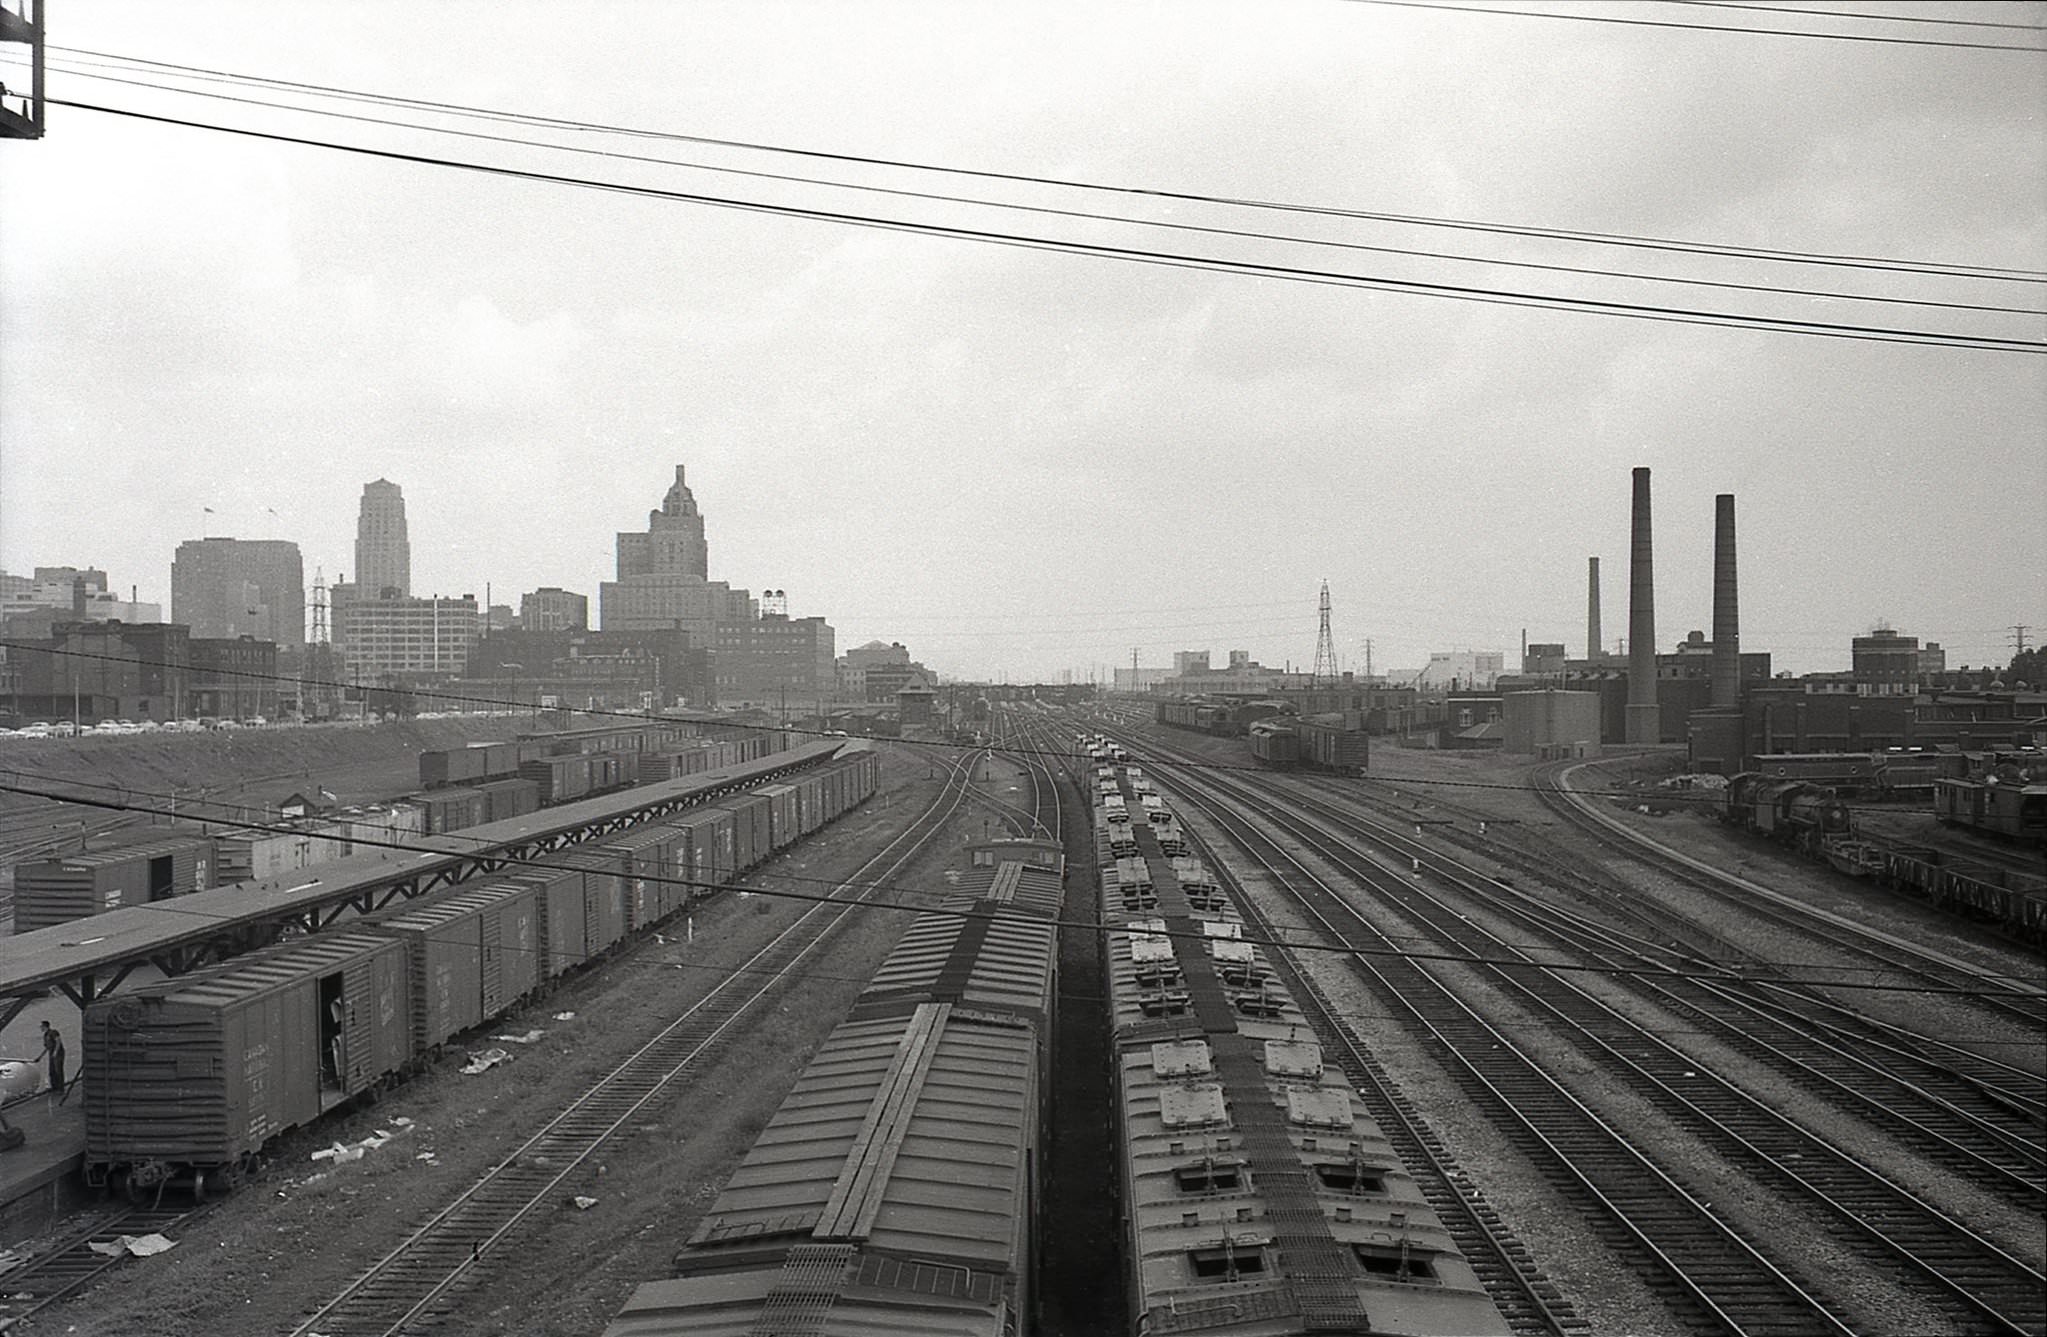 Looking east along the tracks, from the Spadina Avenue bridge, towards downtown, 1960s.